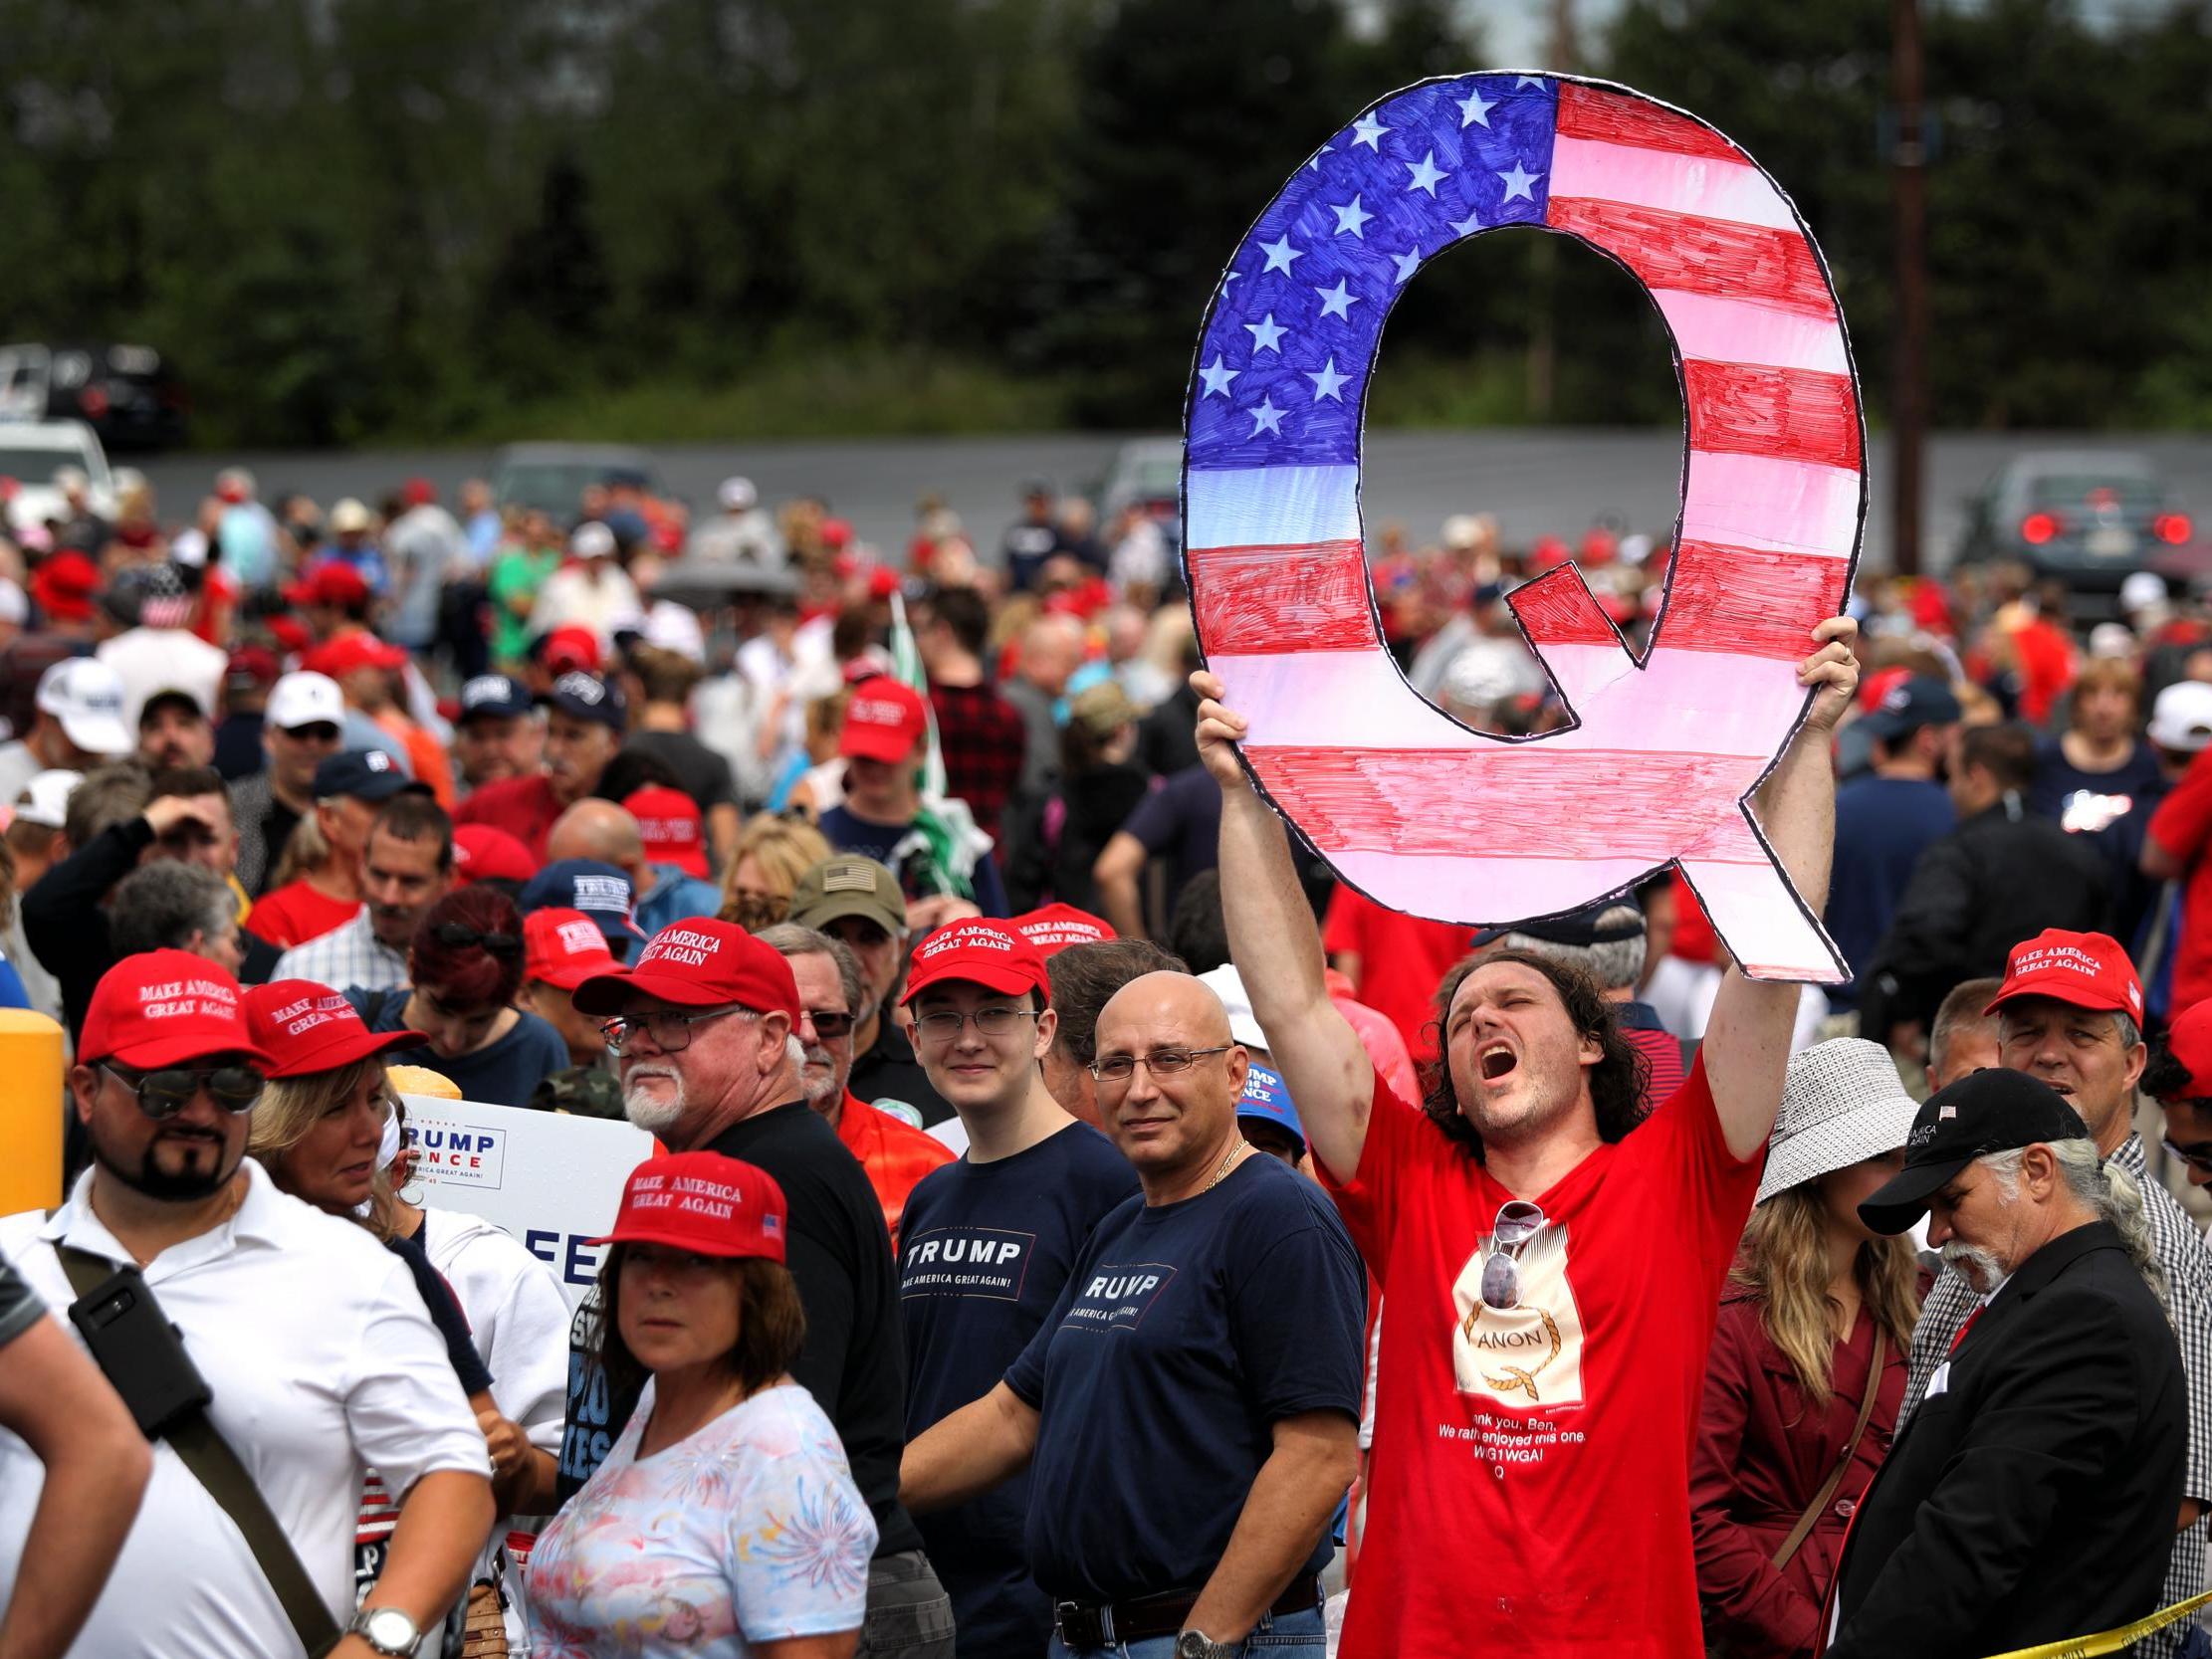 David Reinert, of the conspiracy theory group QAnon, waits to see Trump at a rally